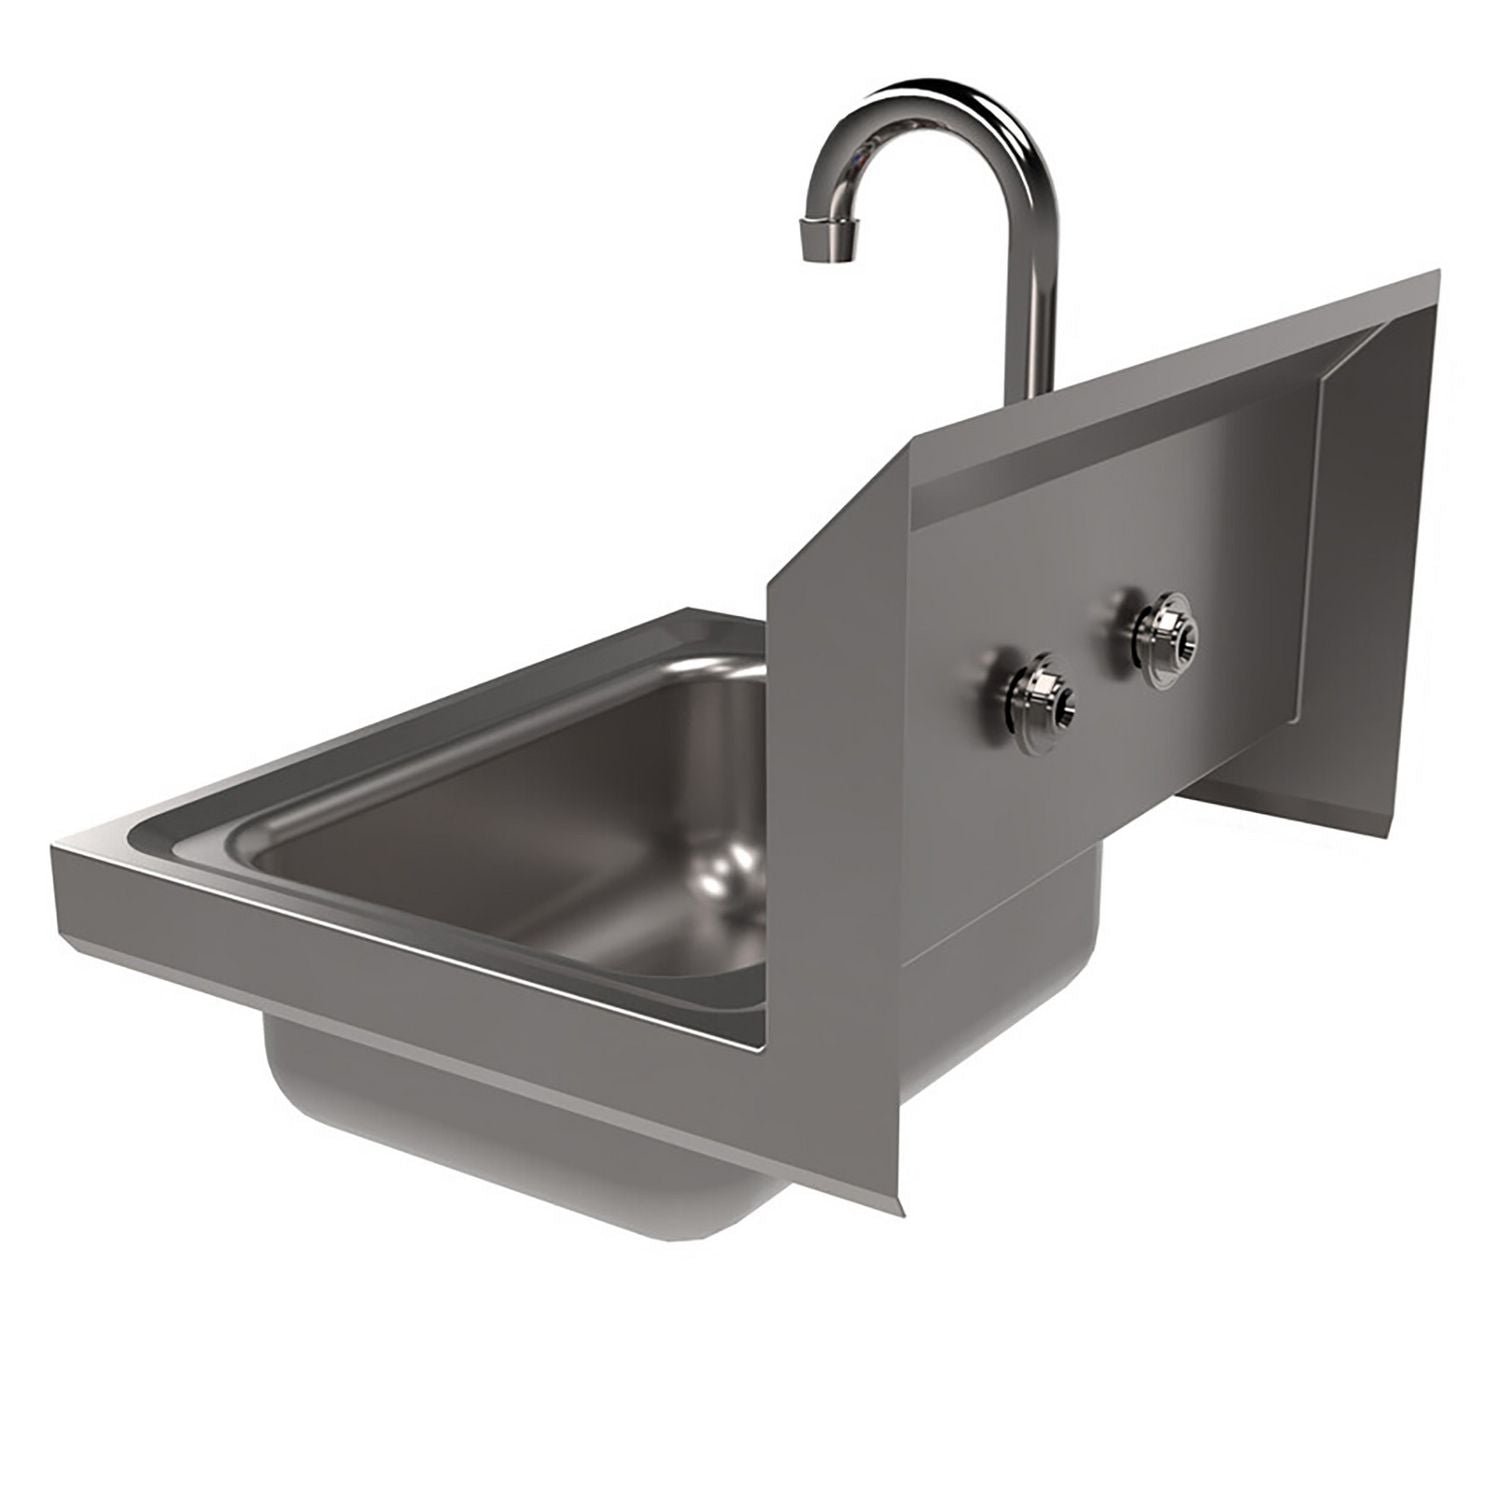 stainless-steel-hand-sink-with-faucet-14-l-x-10-w-x-5-d-ships-in-4-6-business-days_bkebkhsw1410pg - 3